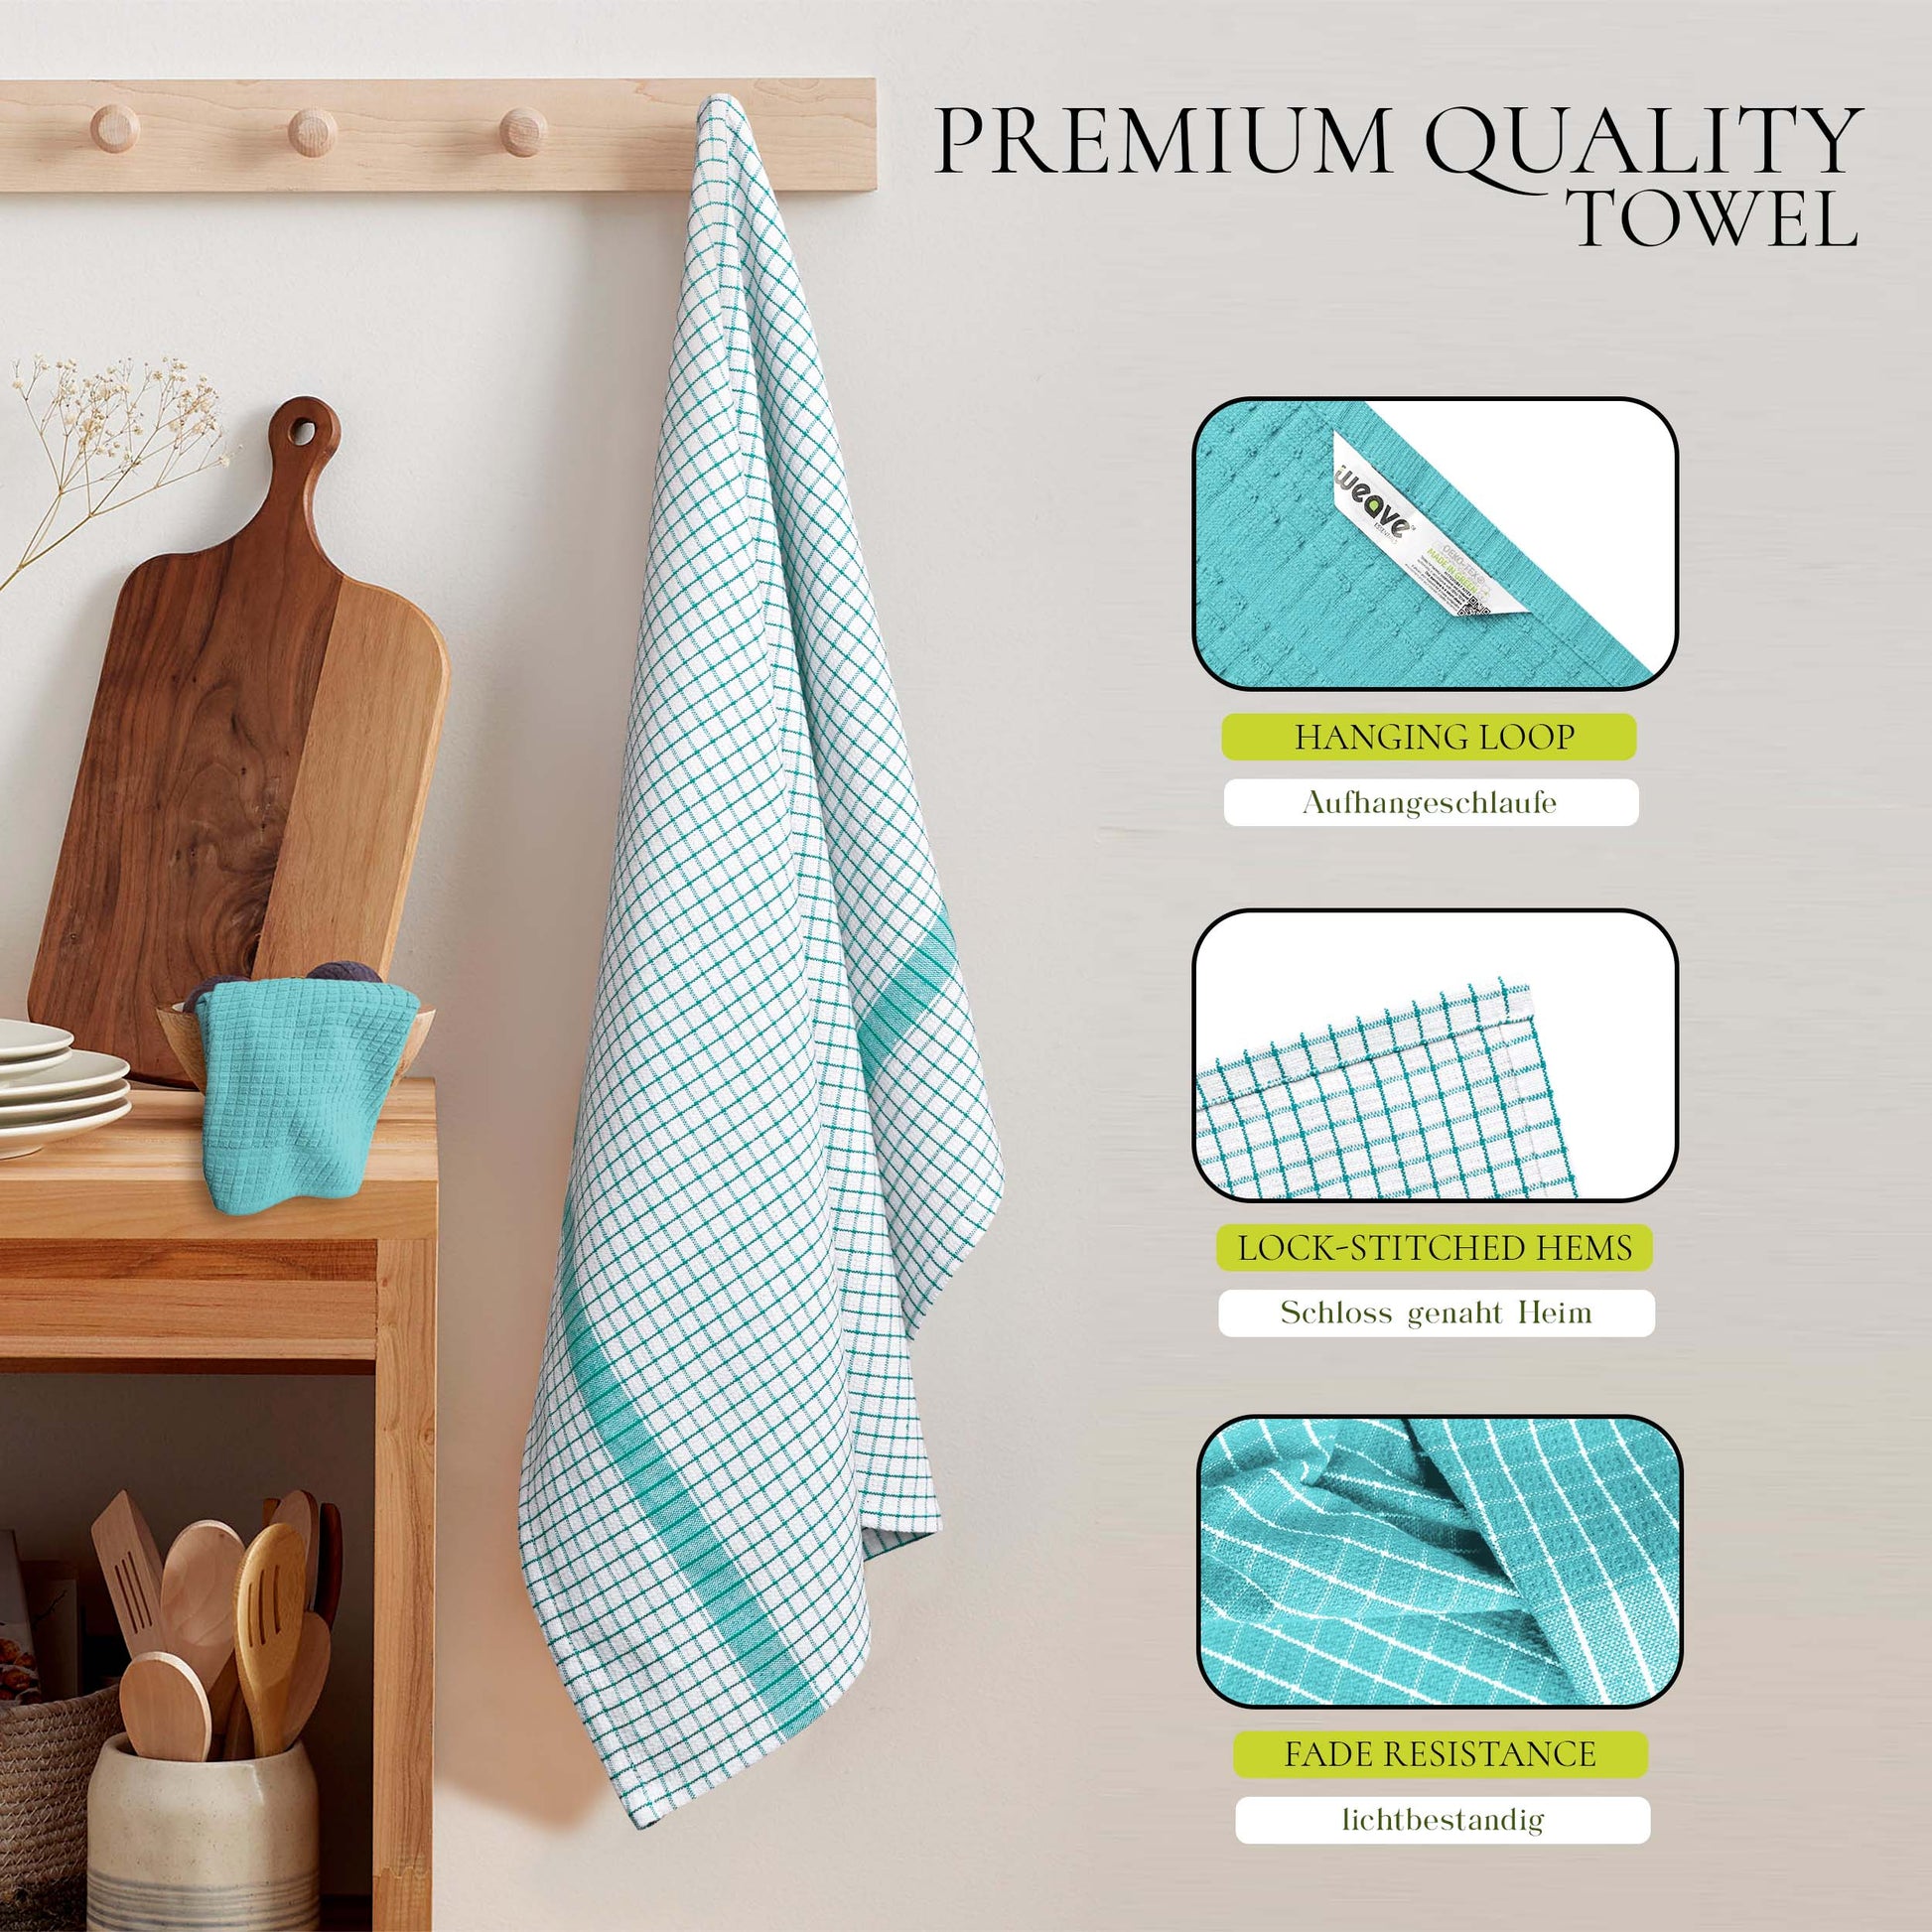 HUI JIA Weave Drying Kitchen Towels Dishes Terry Towels Tea Towel